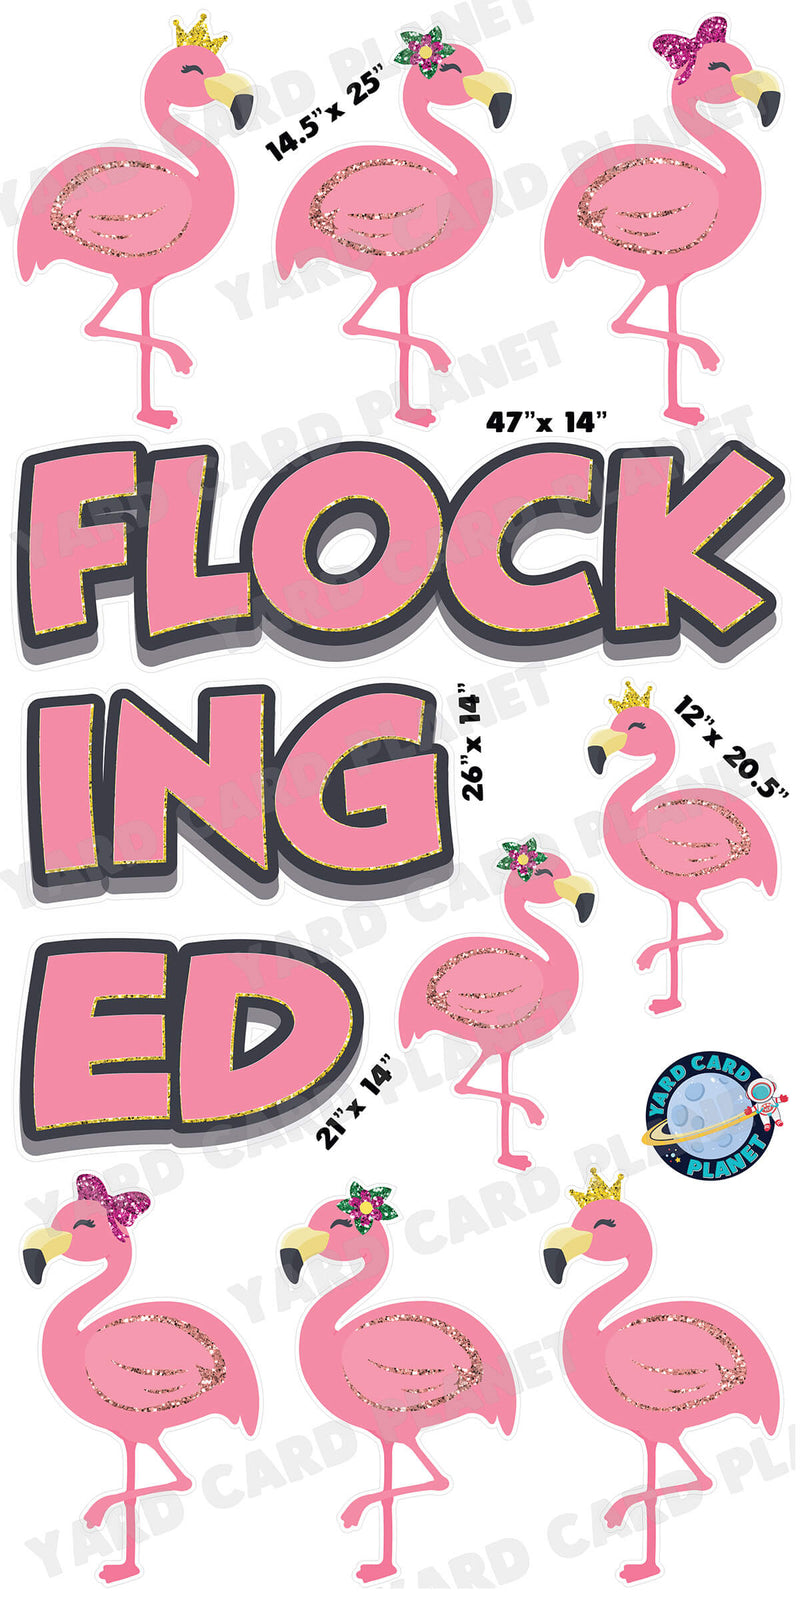 Flocked or Flocking EZ Quick Set and Flamingos Yard Card Flair Set with Measurements